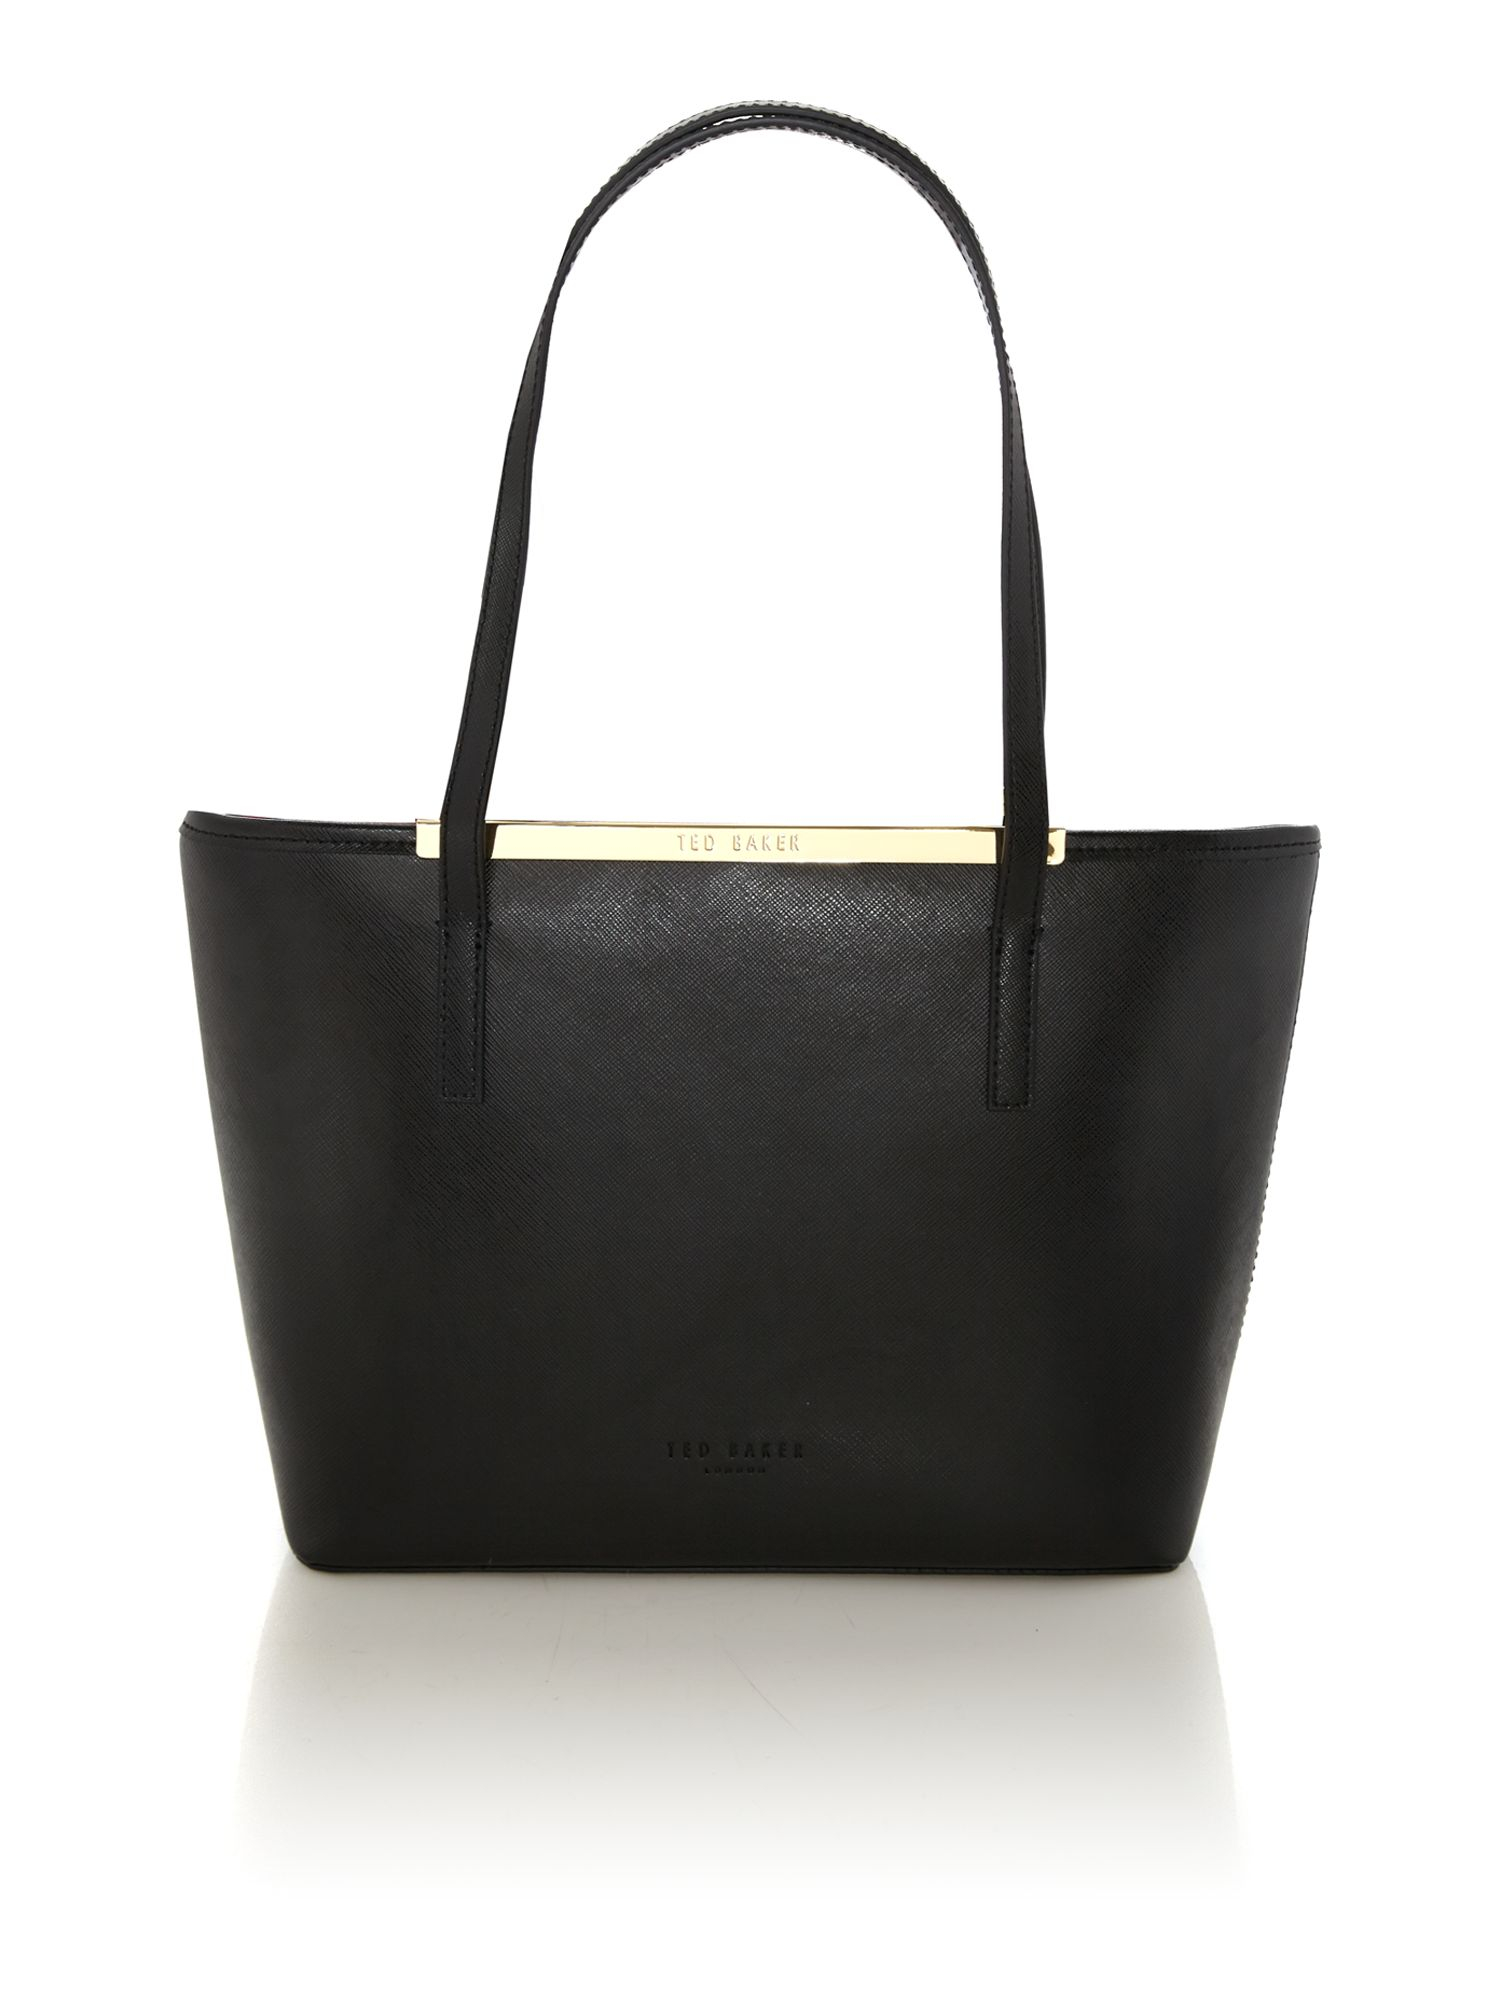 Ted baker Black Printed Small Tote Bag With Pouchette in Black | Lyst